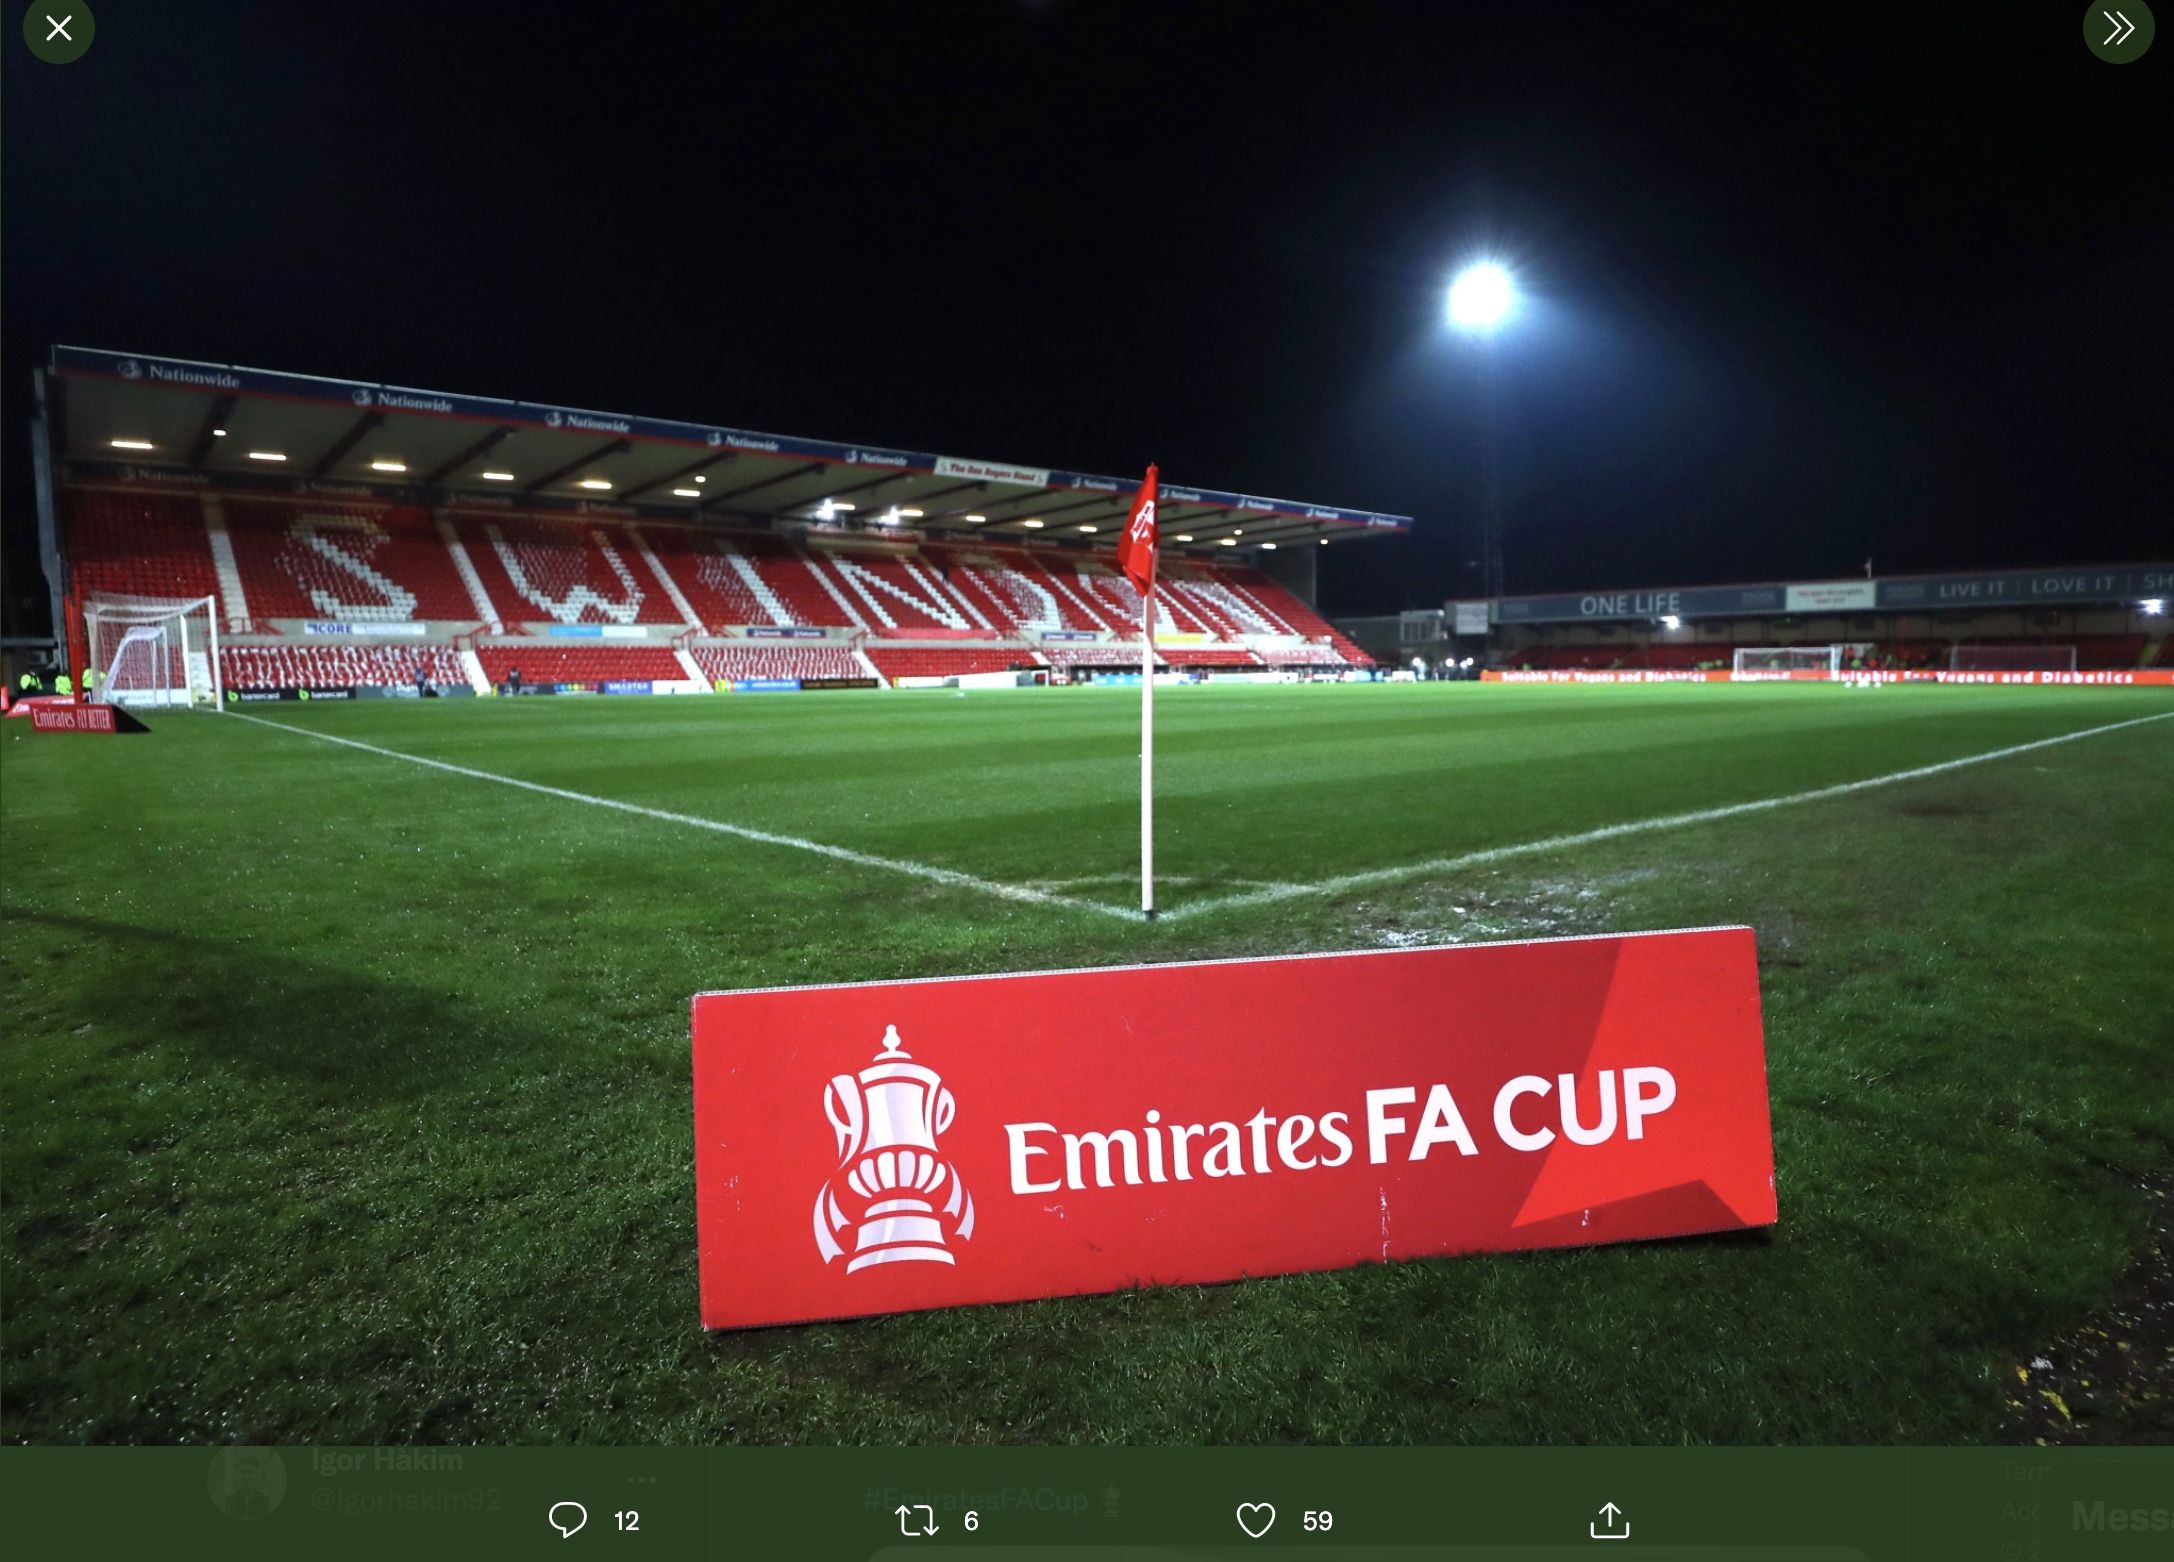 Markas Swindon Town, County Ground (Emirates FA Cup).